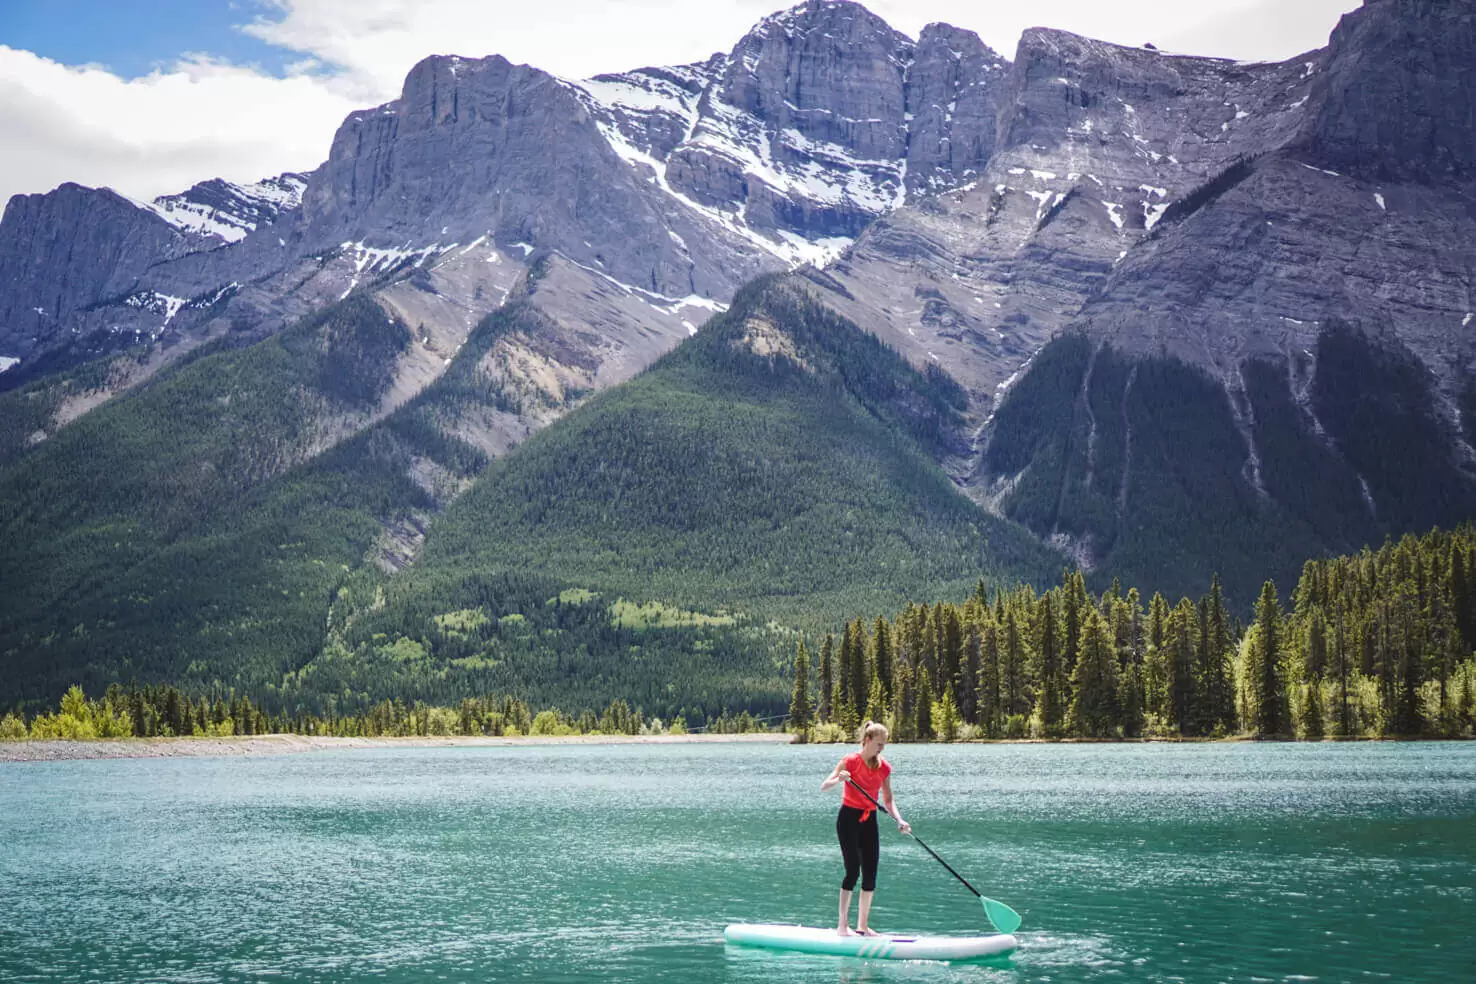 SUP on Rundle Forebay Reservoir, Canmore